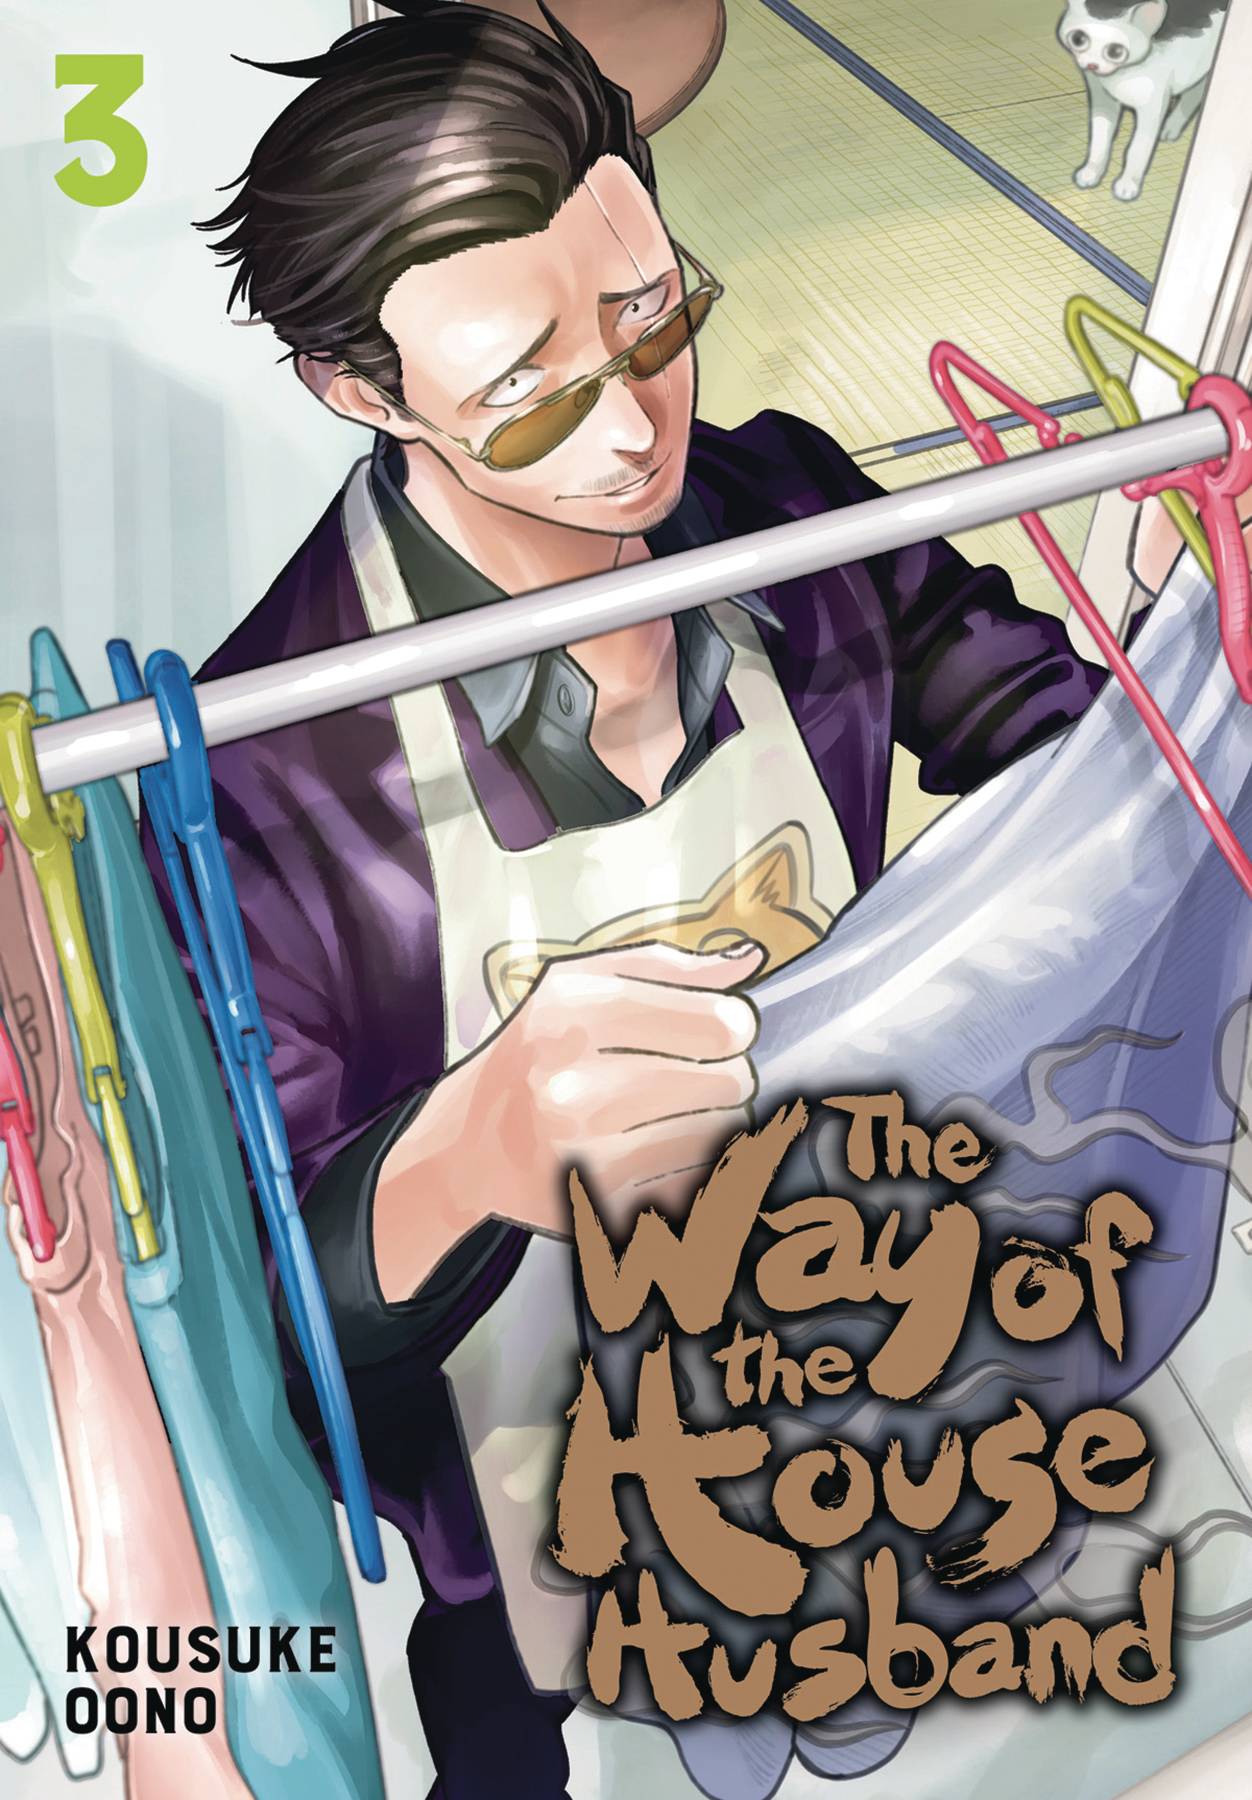 Way of the Househusband Volume 3